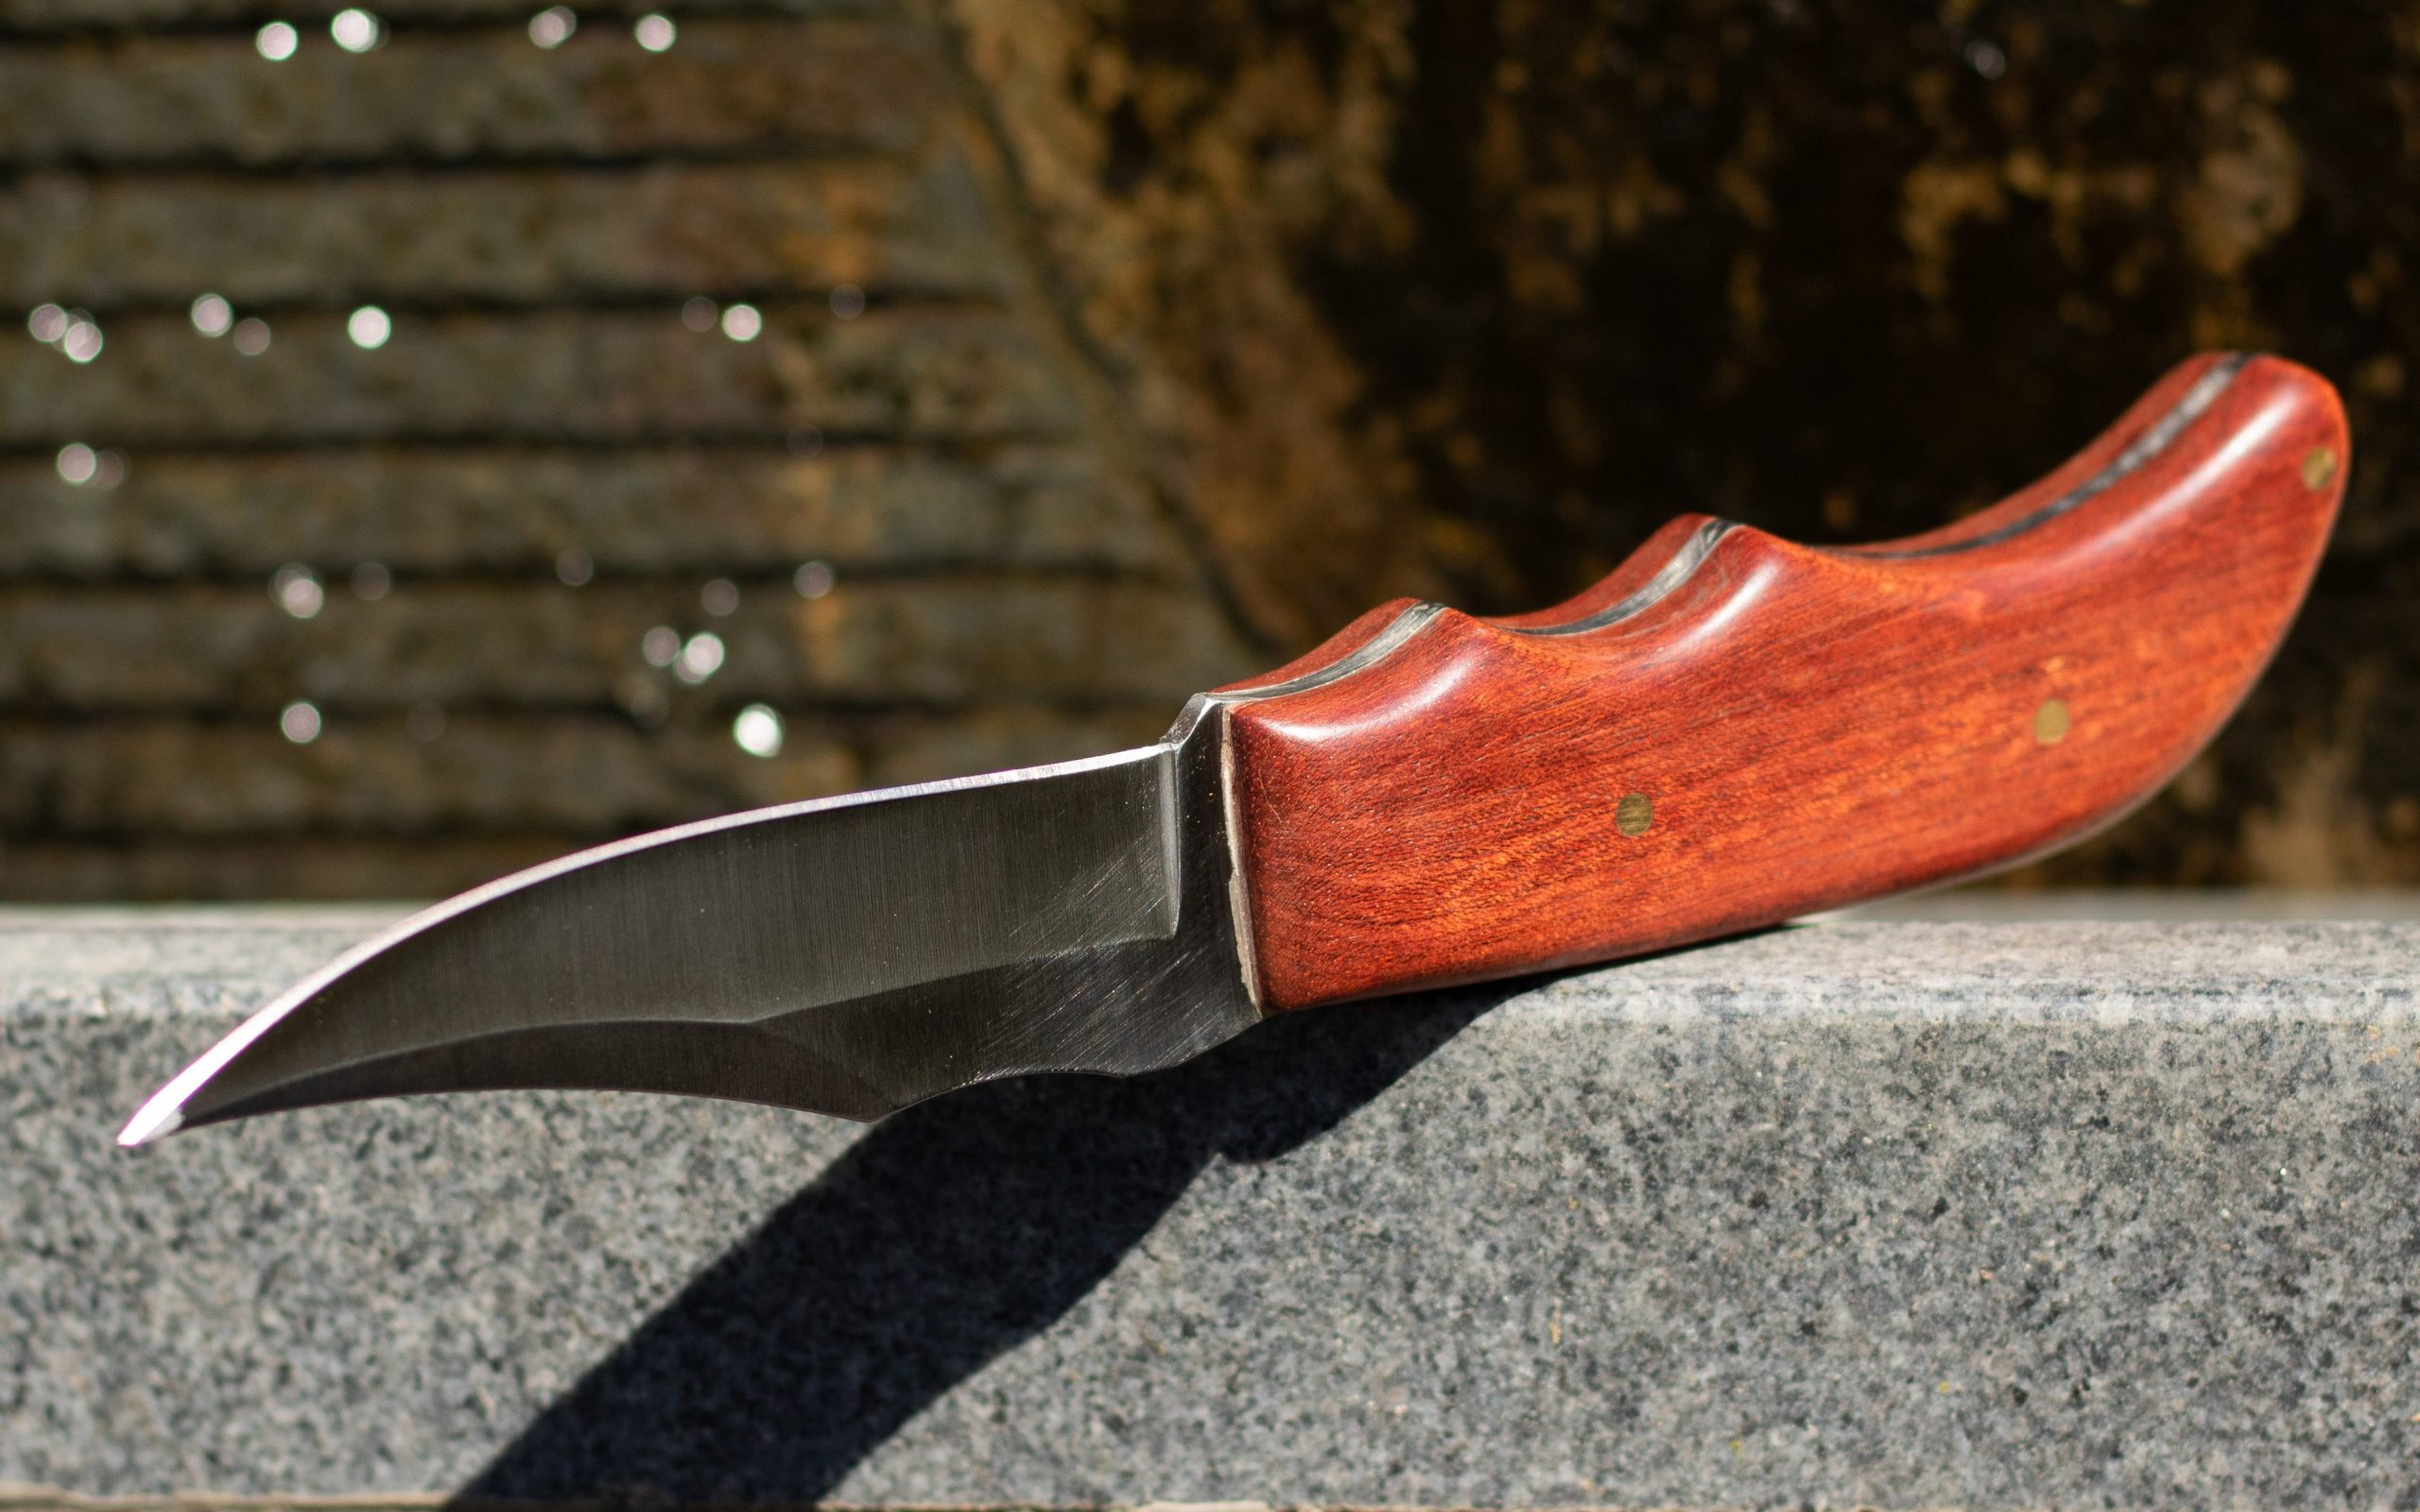 Explorer Knife Kit from William Wood-Write Ltd made with Bloodwood Knife scales